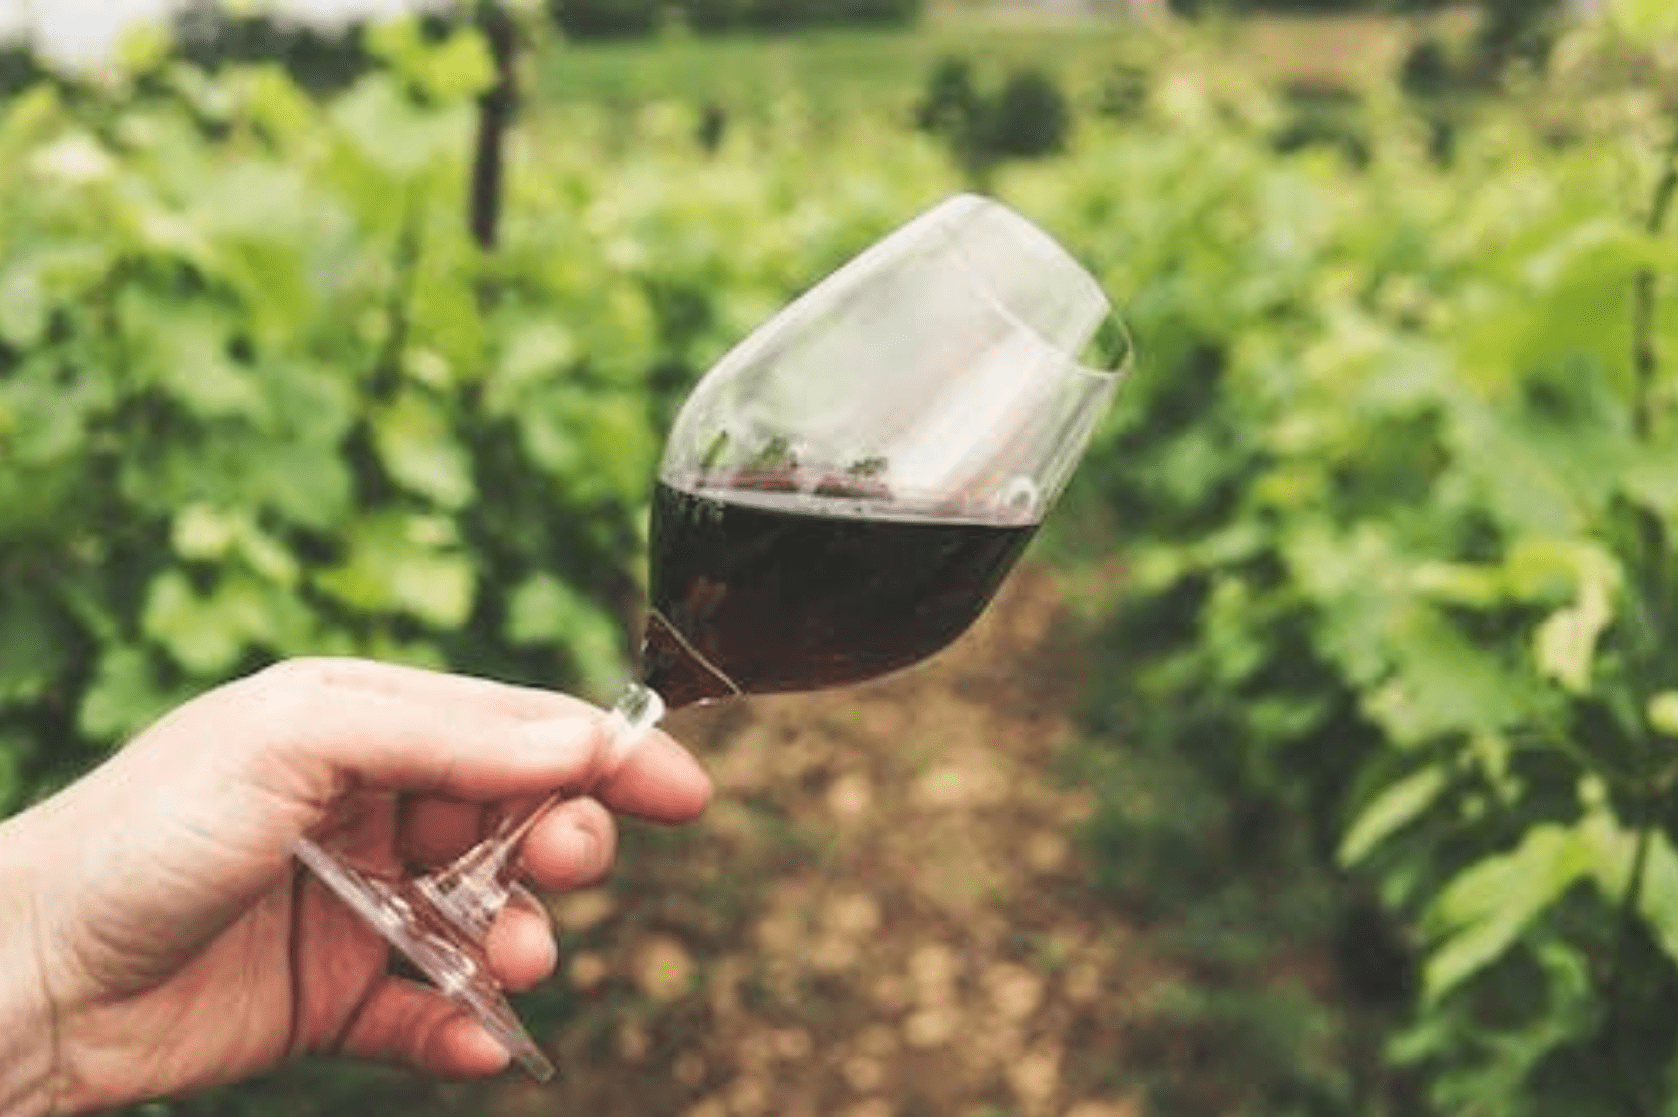 A person holding a glass of red wine in a vineyard